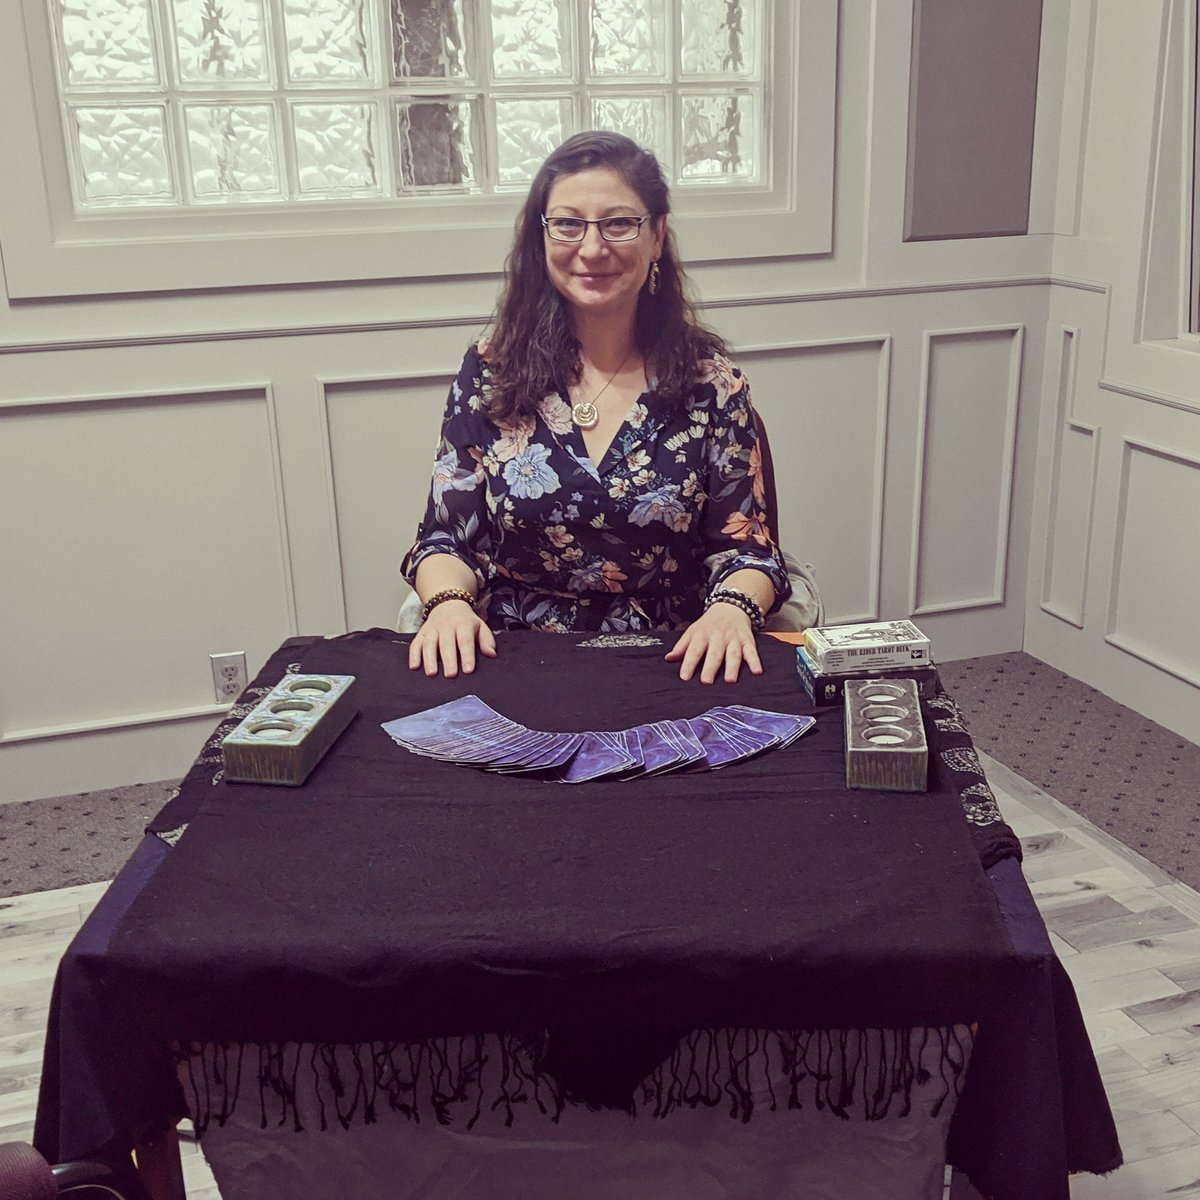 Settled into the reading room at @InnerCircleYYC , will be here offering readings until 1:00pm! Receive guidance, clarity, & a safe space to let it go. #SeeTheGood #FindYourStrengths #tarot #cardreader #psychic #medium #YYCDeals #Calgary #YYCLiving